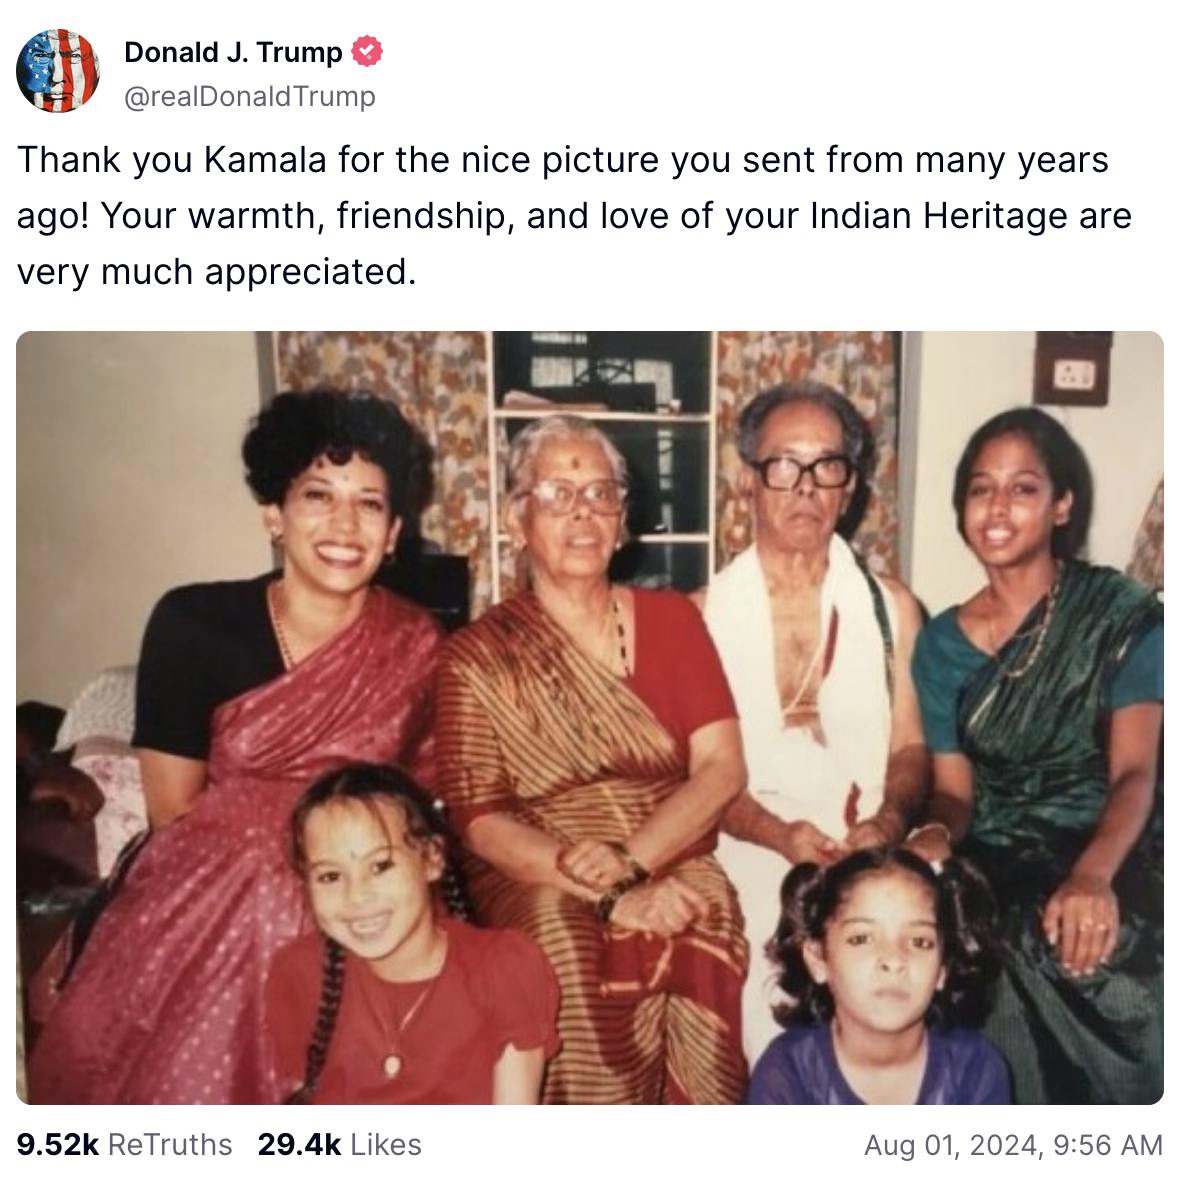 Donald Trump Truth Social screenshot: Donald J. Trump @realDonaldTrump Thank you Kamala for the nice picture you sent from many years ago! Your warmth, friendship, and love of your Indian Heritage are very much appreciated. (photo of Kamala Harris wearing a black and red sari, and four of her family members. All are dressed in Indian traditional attire.) 9.52k ReTruth 29.4 Likes August 01, 2024, 9:56 A.M.